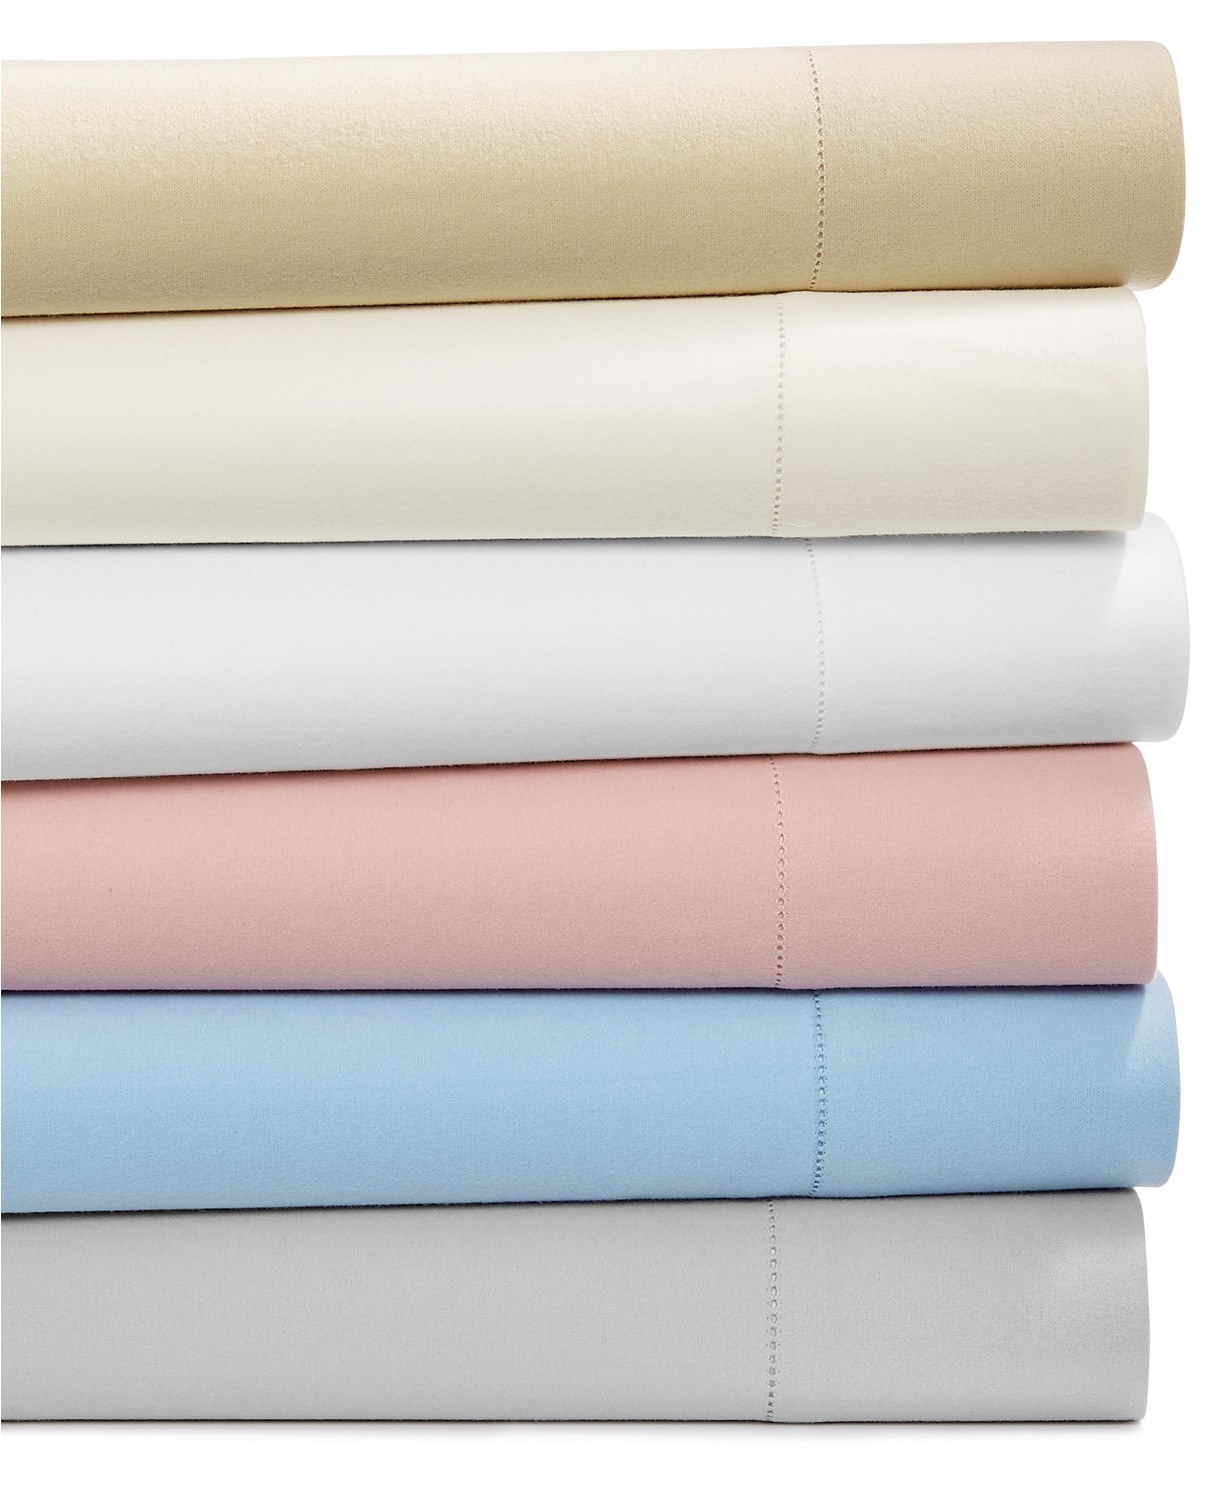 Sheets in different muted pastels stacked on top of each other 